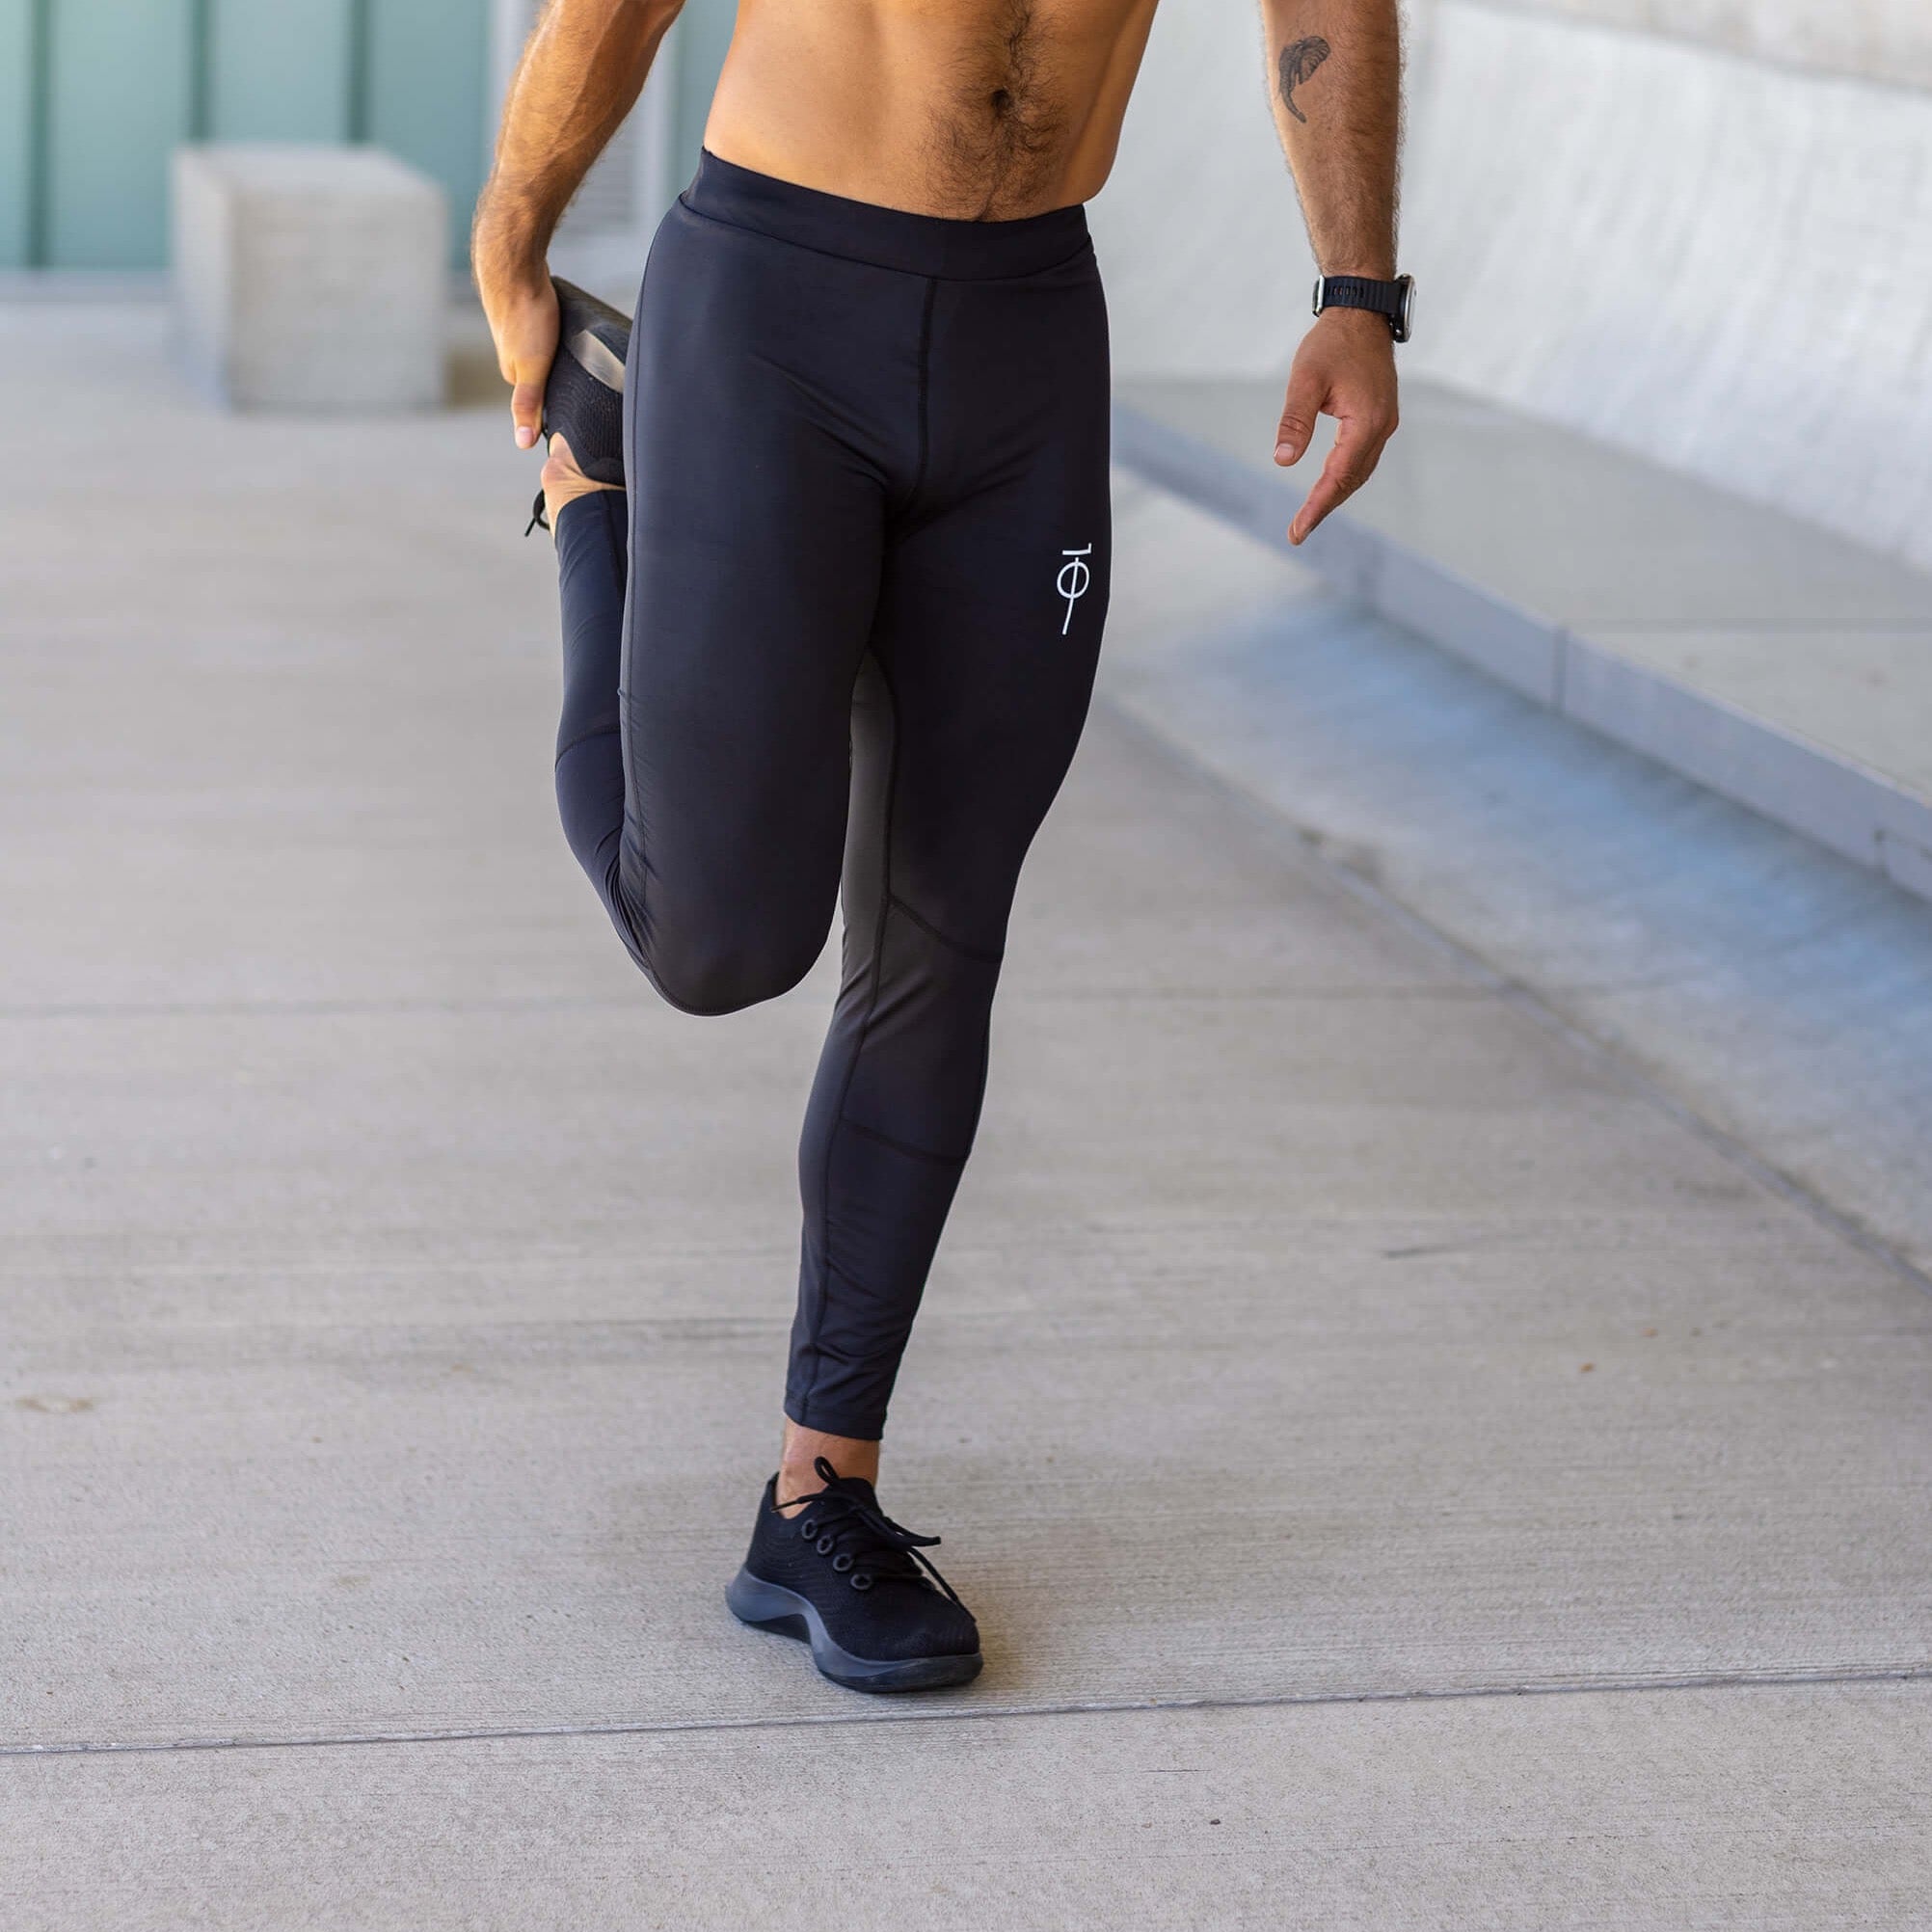 Buy The Run Tights for men